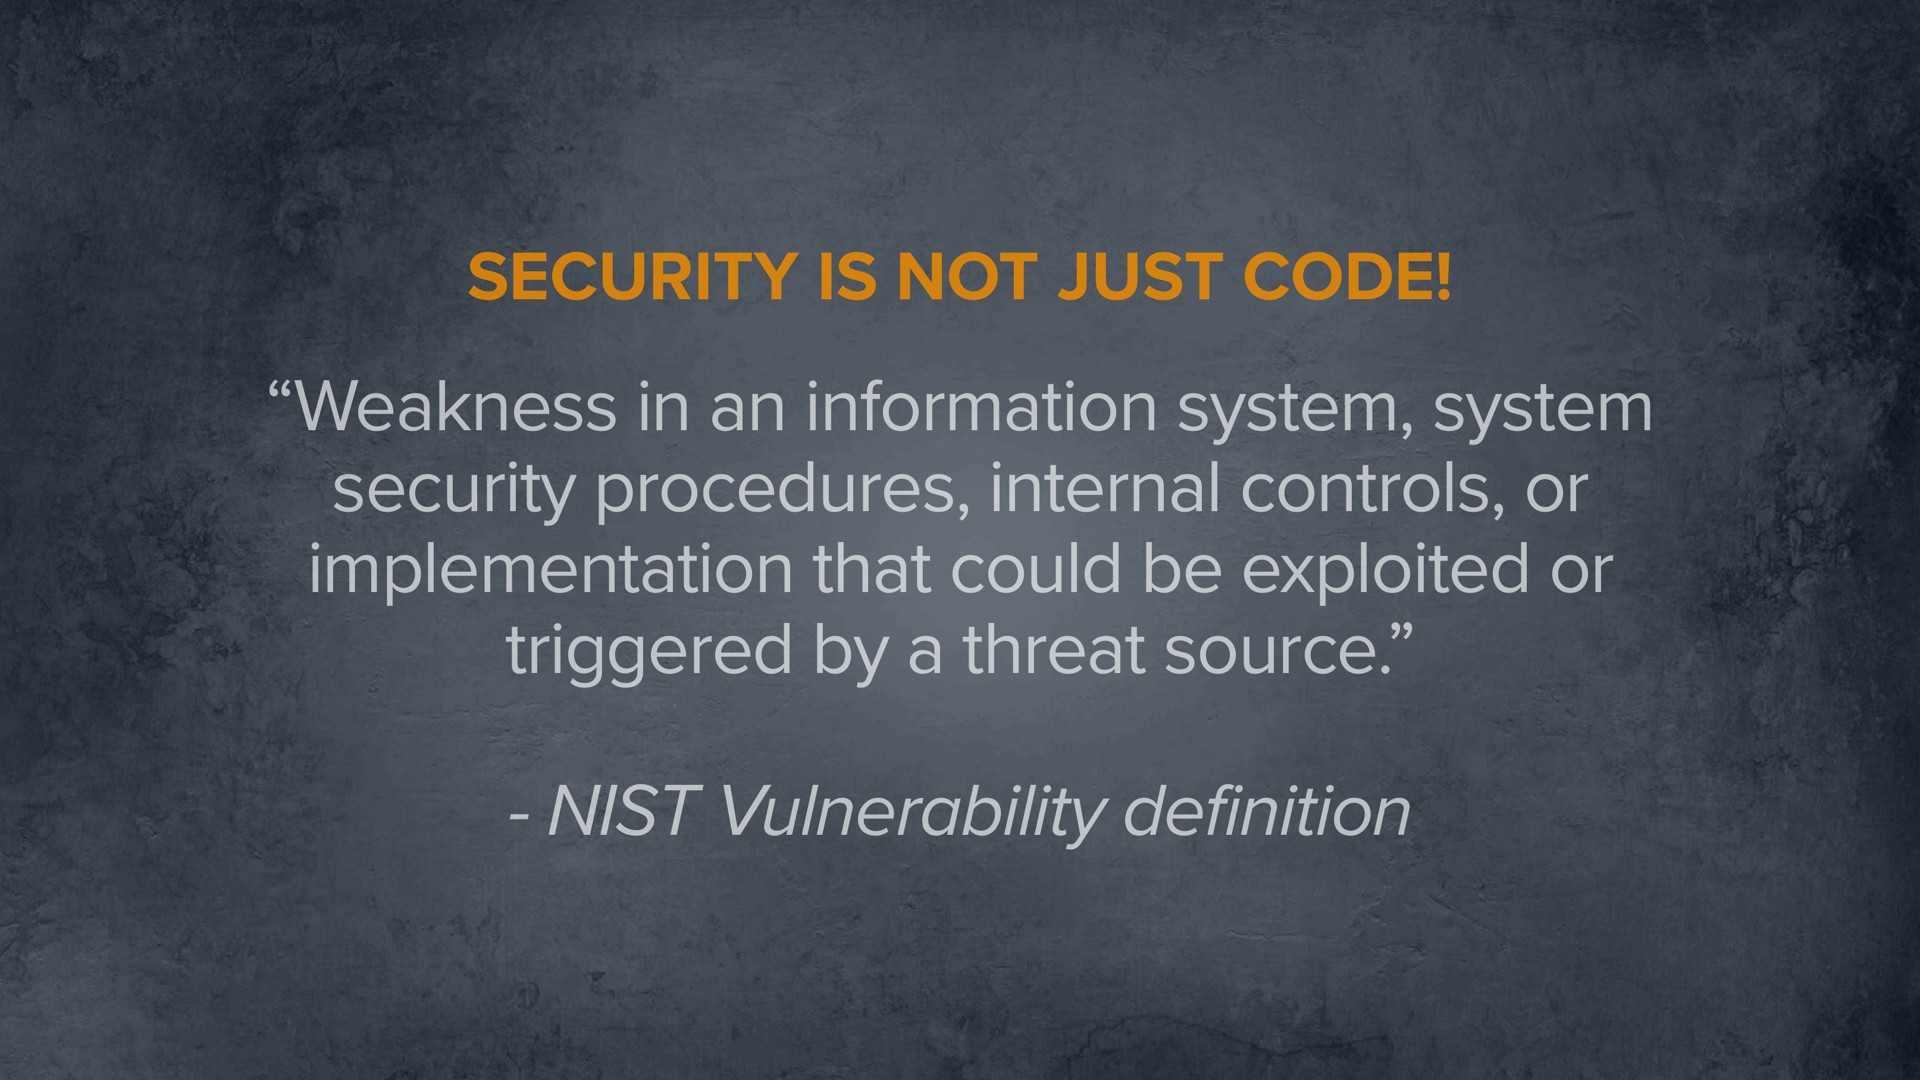 weakness in an information system system security procedures internal controls or implementation that could be exploited or triggered by a threat source vulnerability definition is not just code | a16z